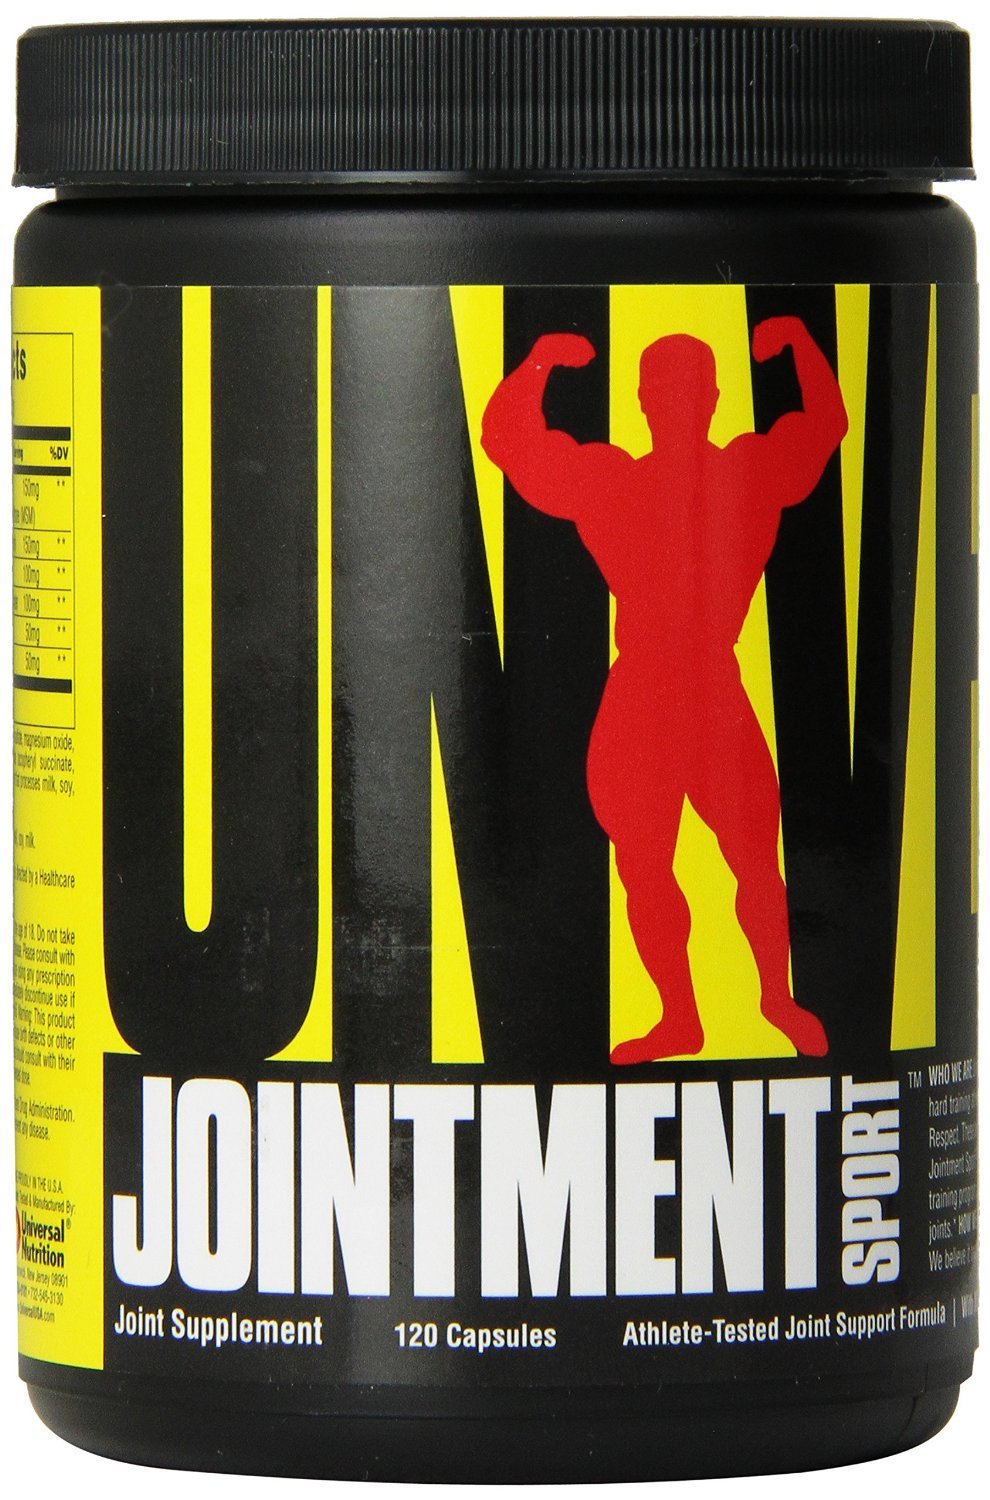 Jointment Sport, 120 pcs, Universal Nutrition. Glucosamine Chondroitin. General Health Ligament and Joint strengthening 